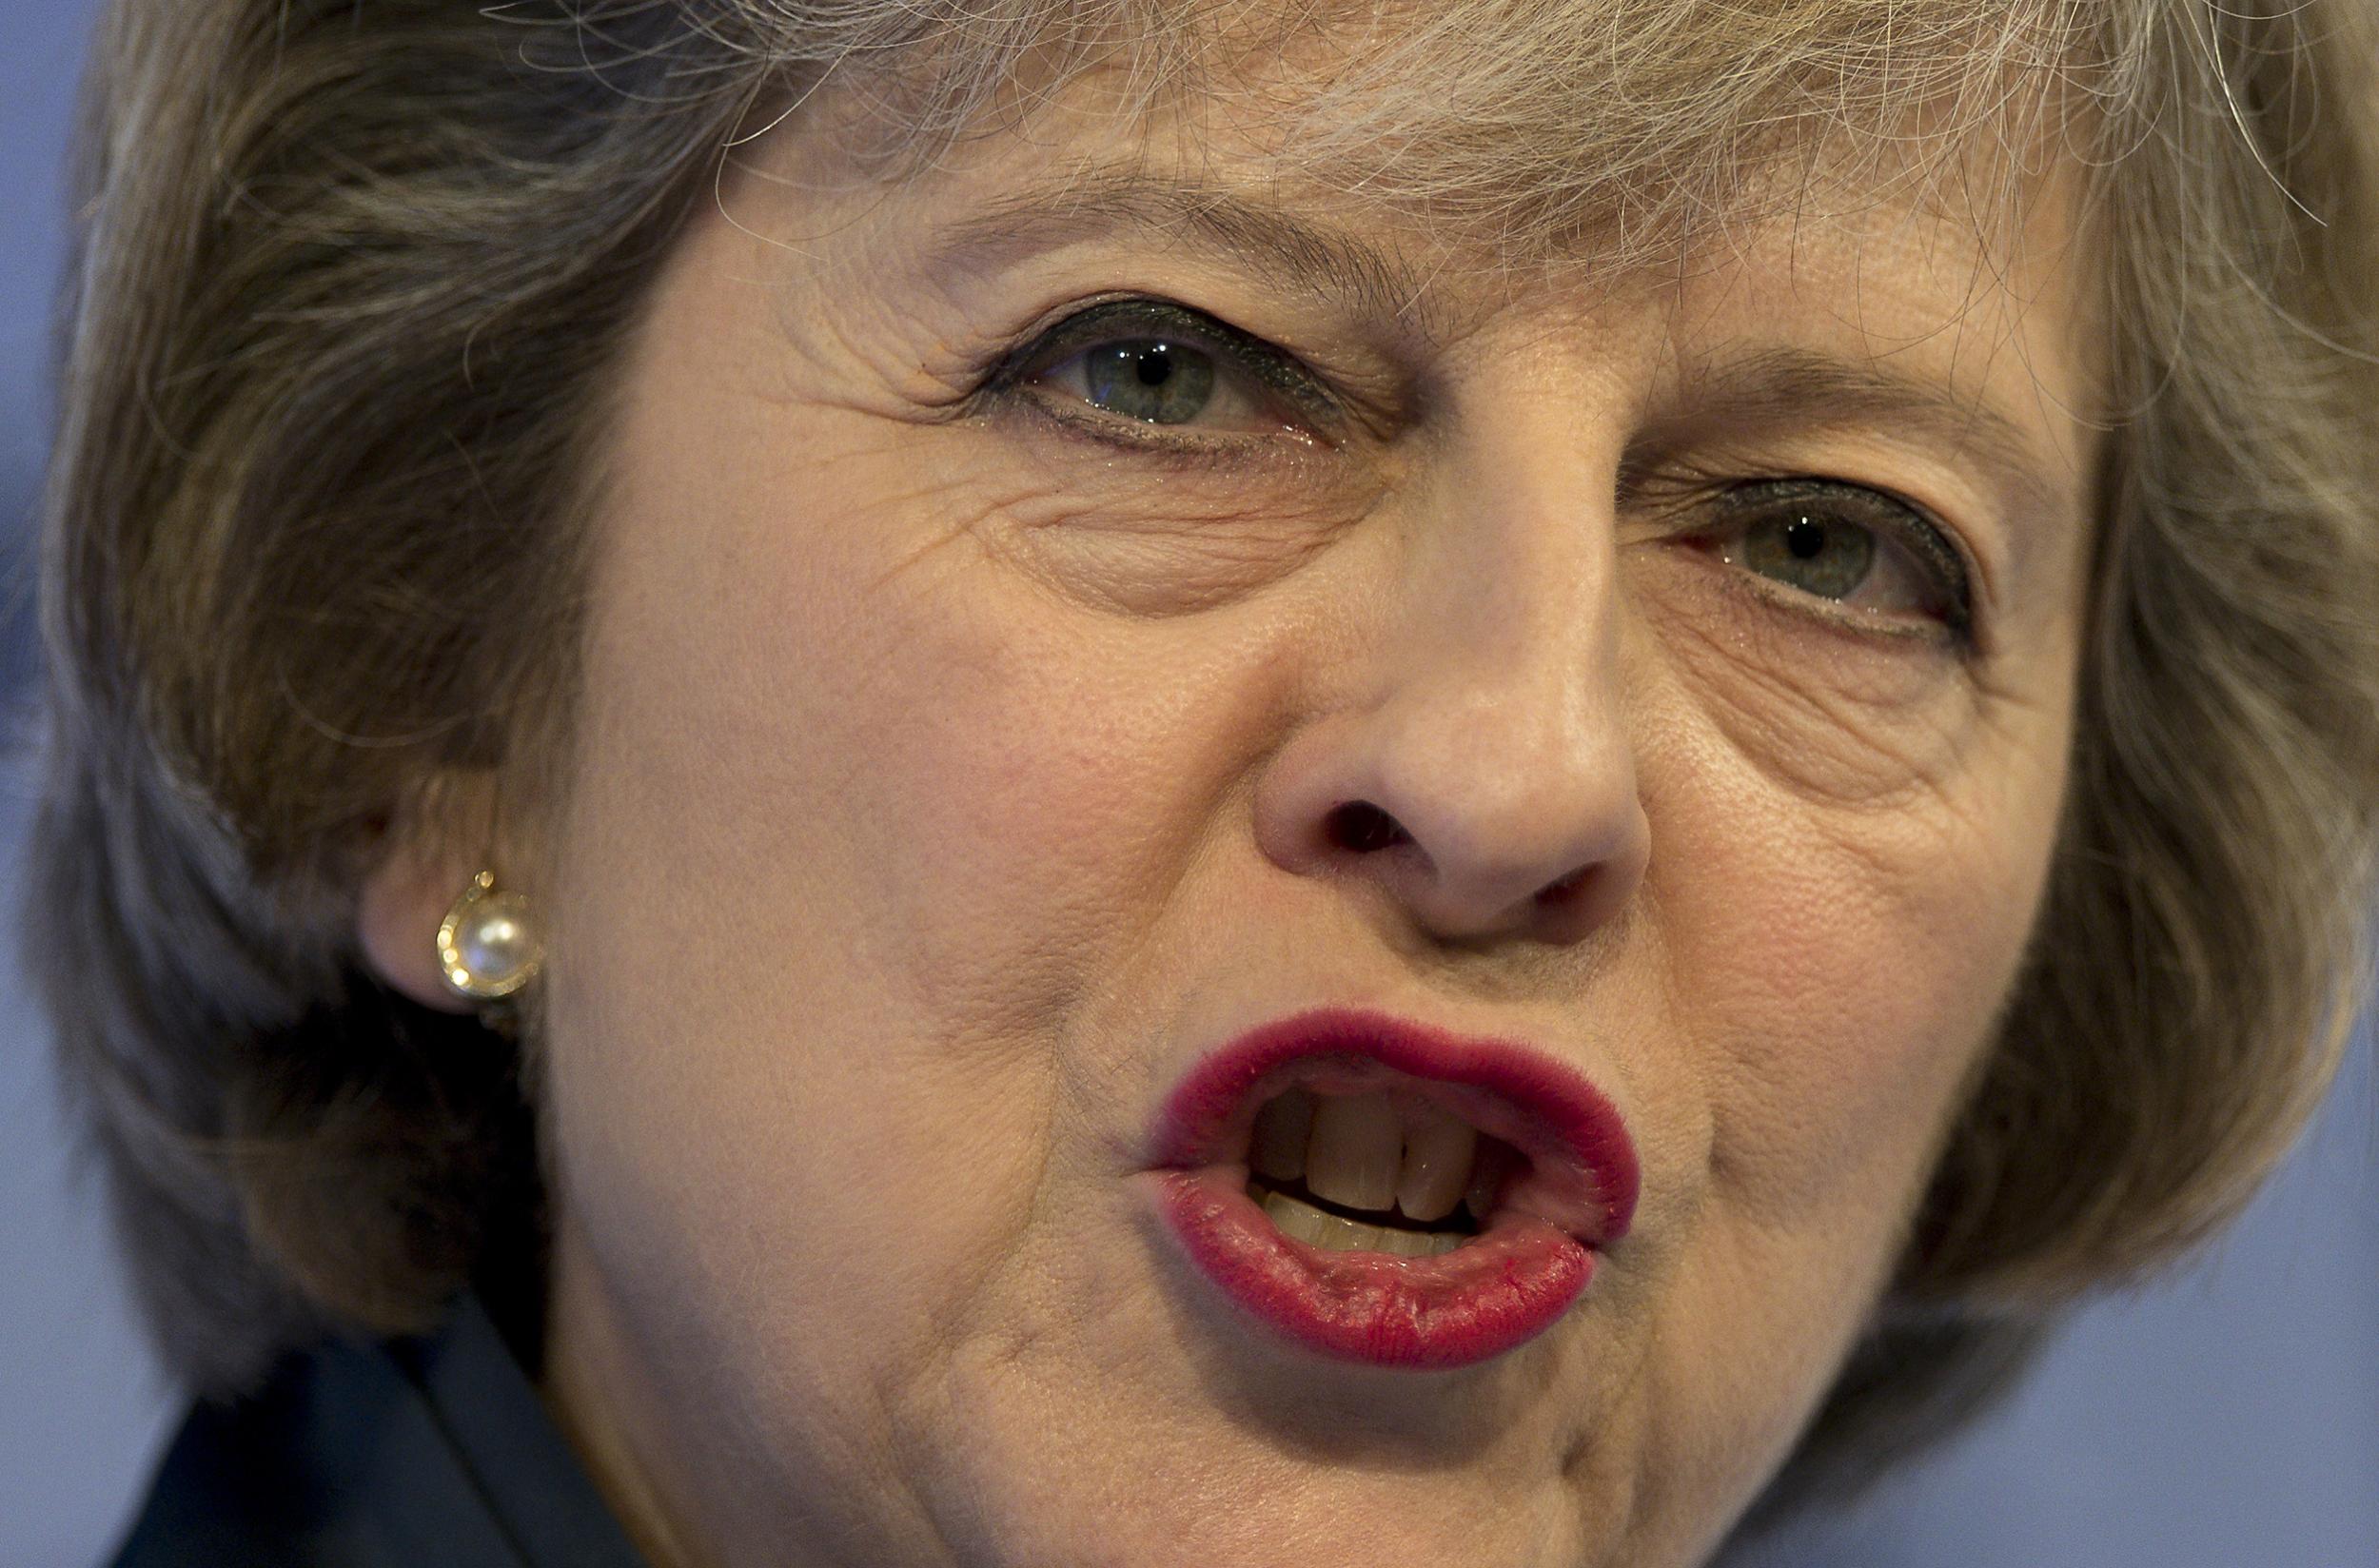 The PM planned to put the children at the 'back of the queue' for school places